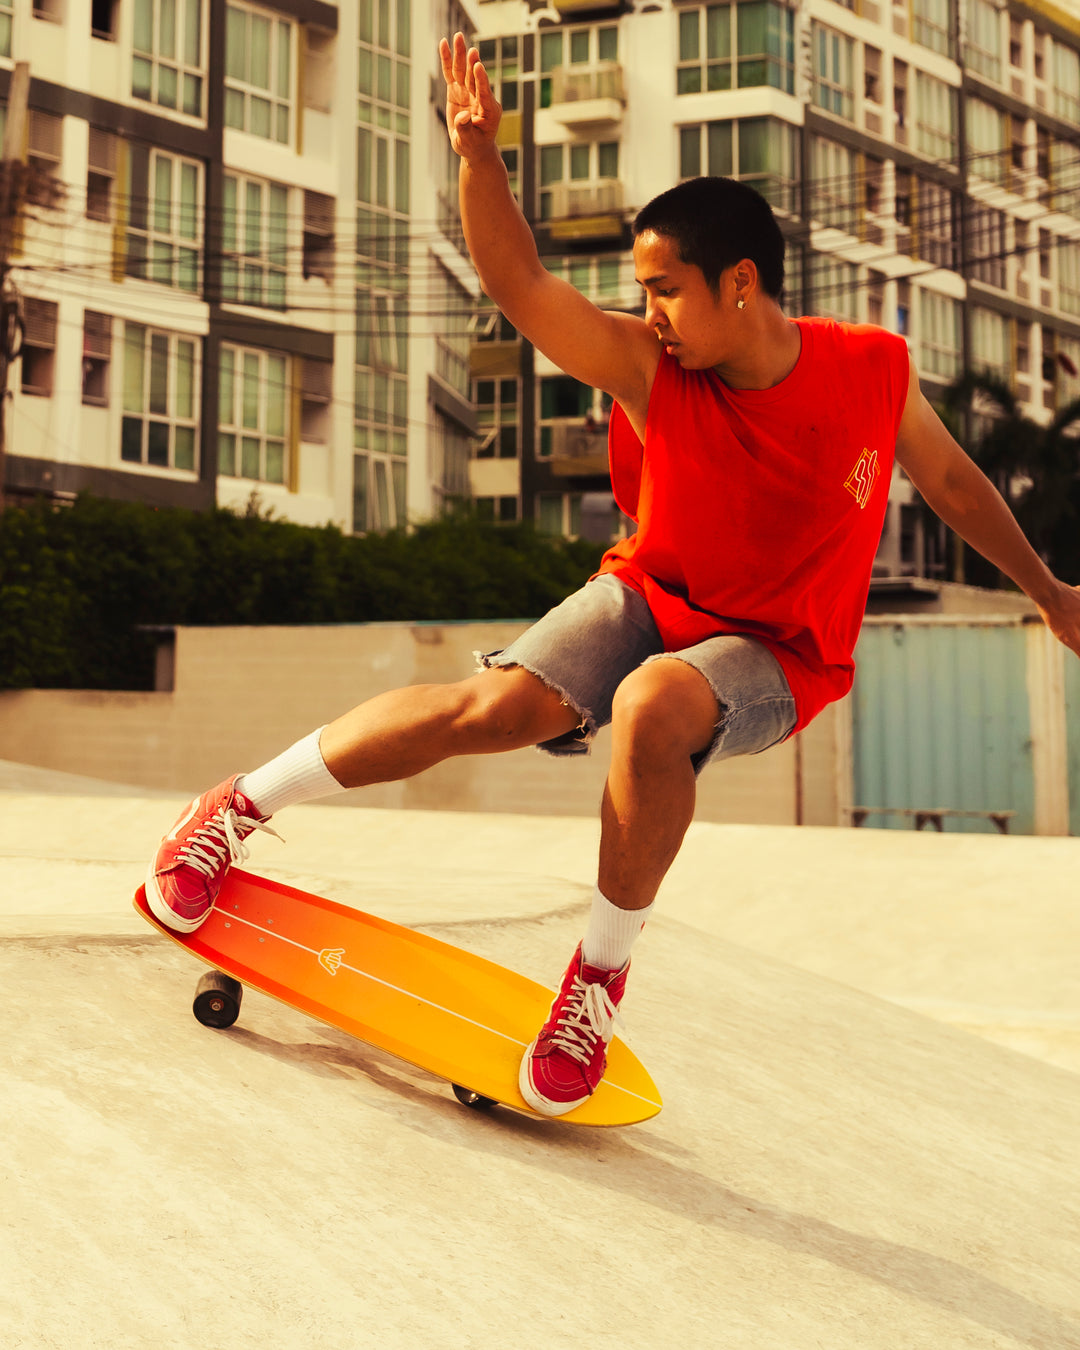 What is a surfskate and why are so many people riding one?